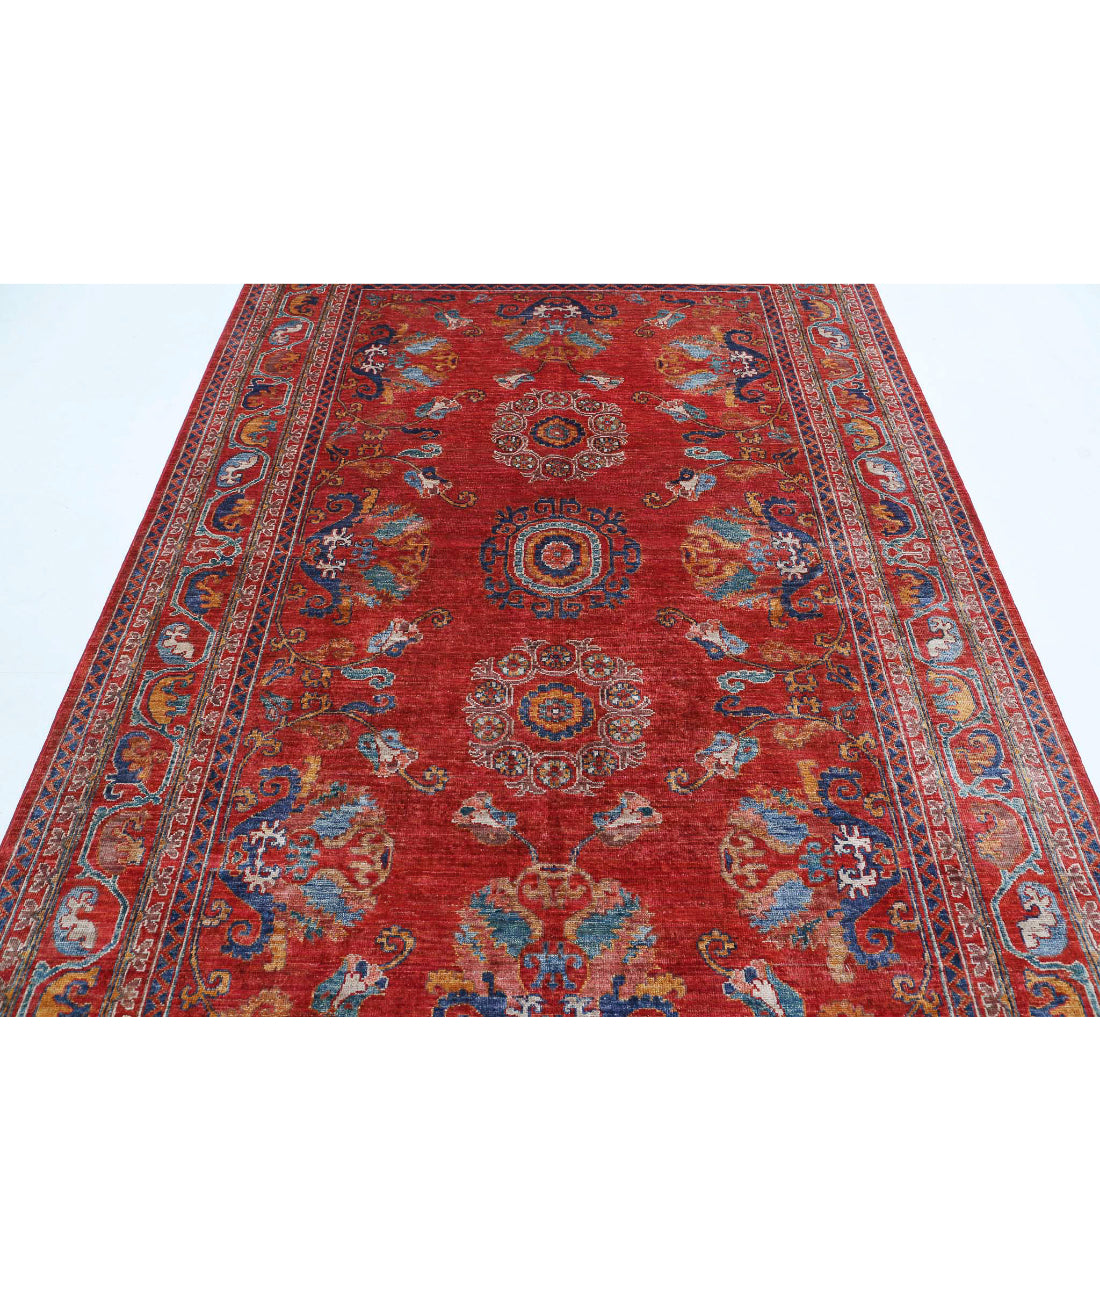 Hand Knotted Nomadic Caucasian Humna Wool Rug - 5'11'' x 8'10'' 5'11'' x 8'10'' (178 X 265) / Red / N/A